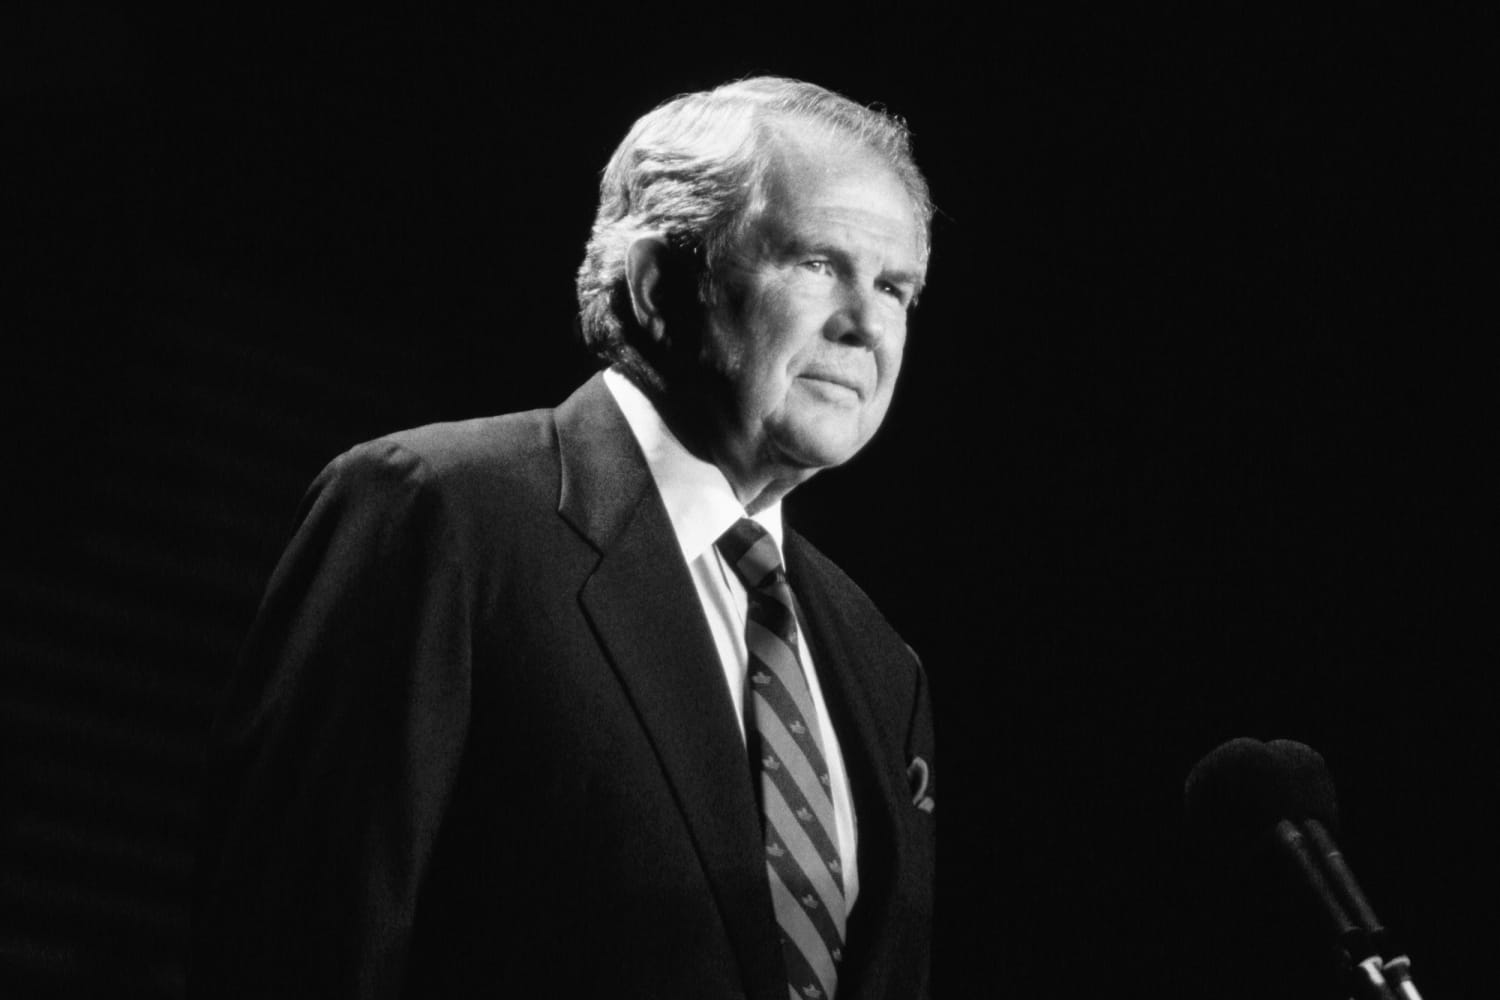 Pat Robertson, conservative evangelist and Christian Coalition founder, dies at 93